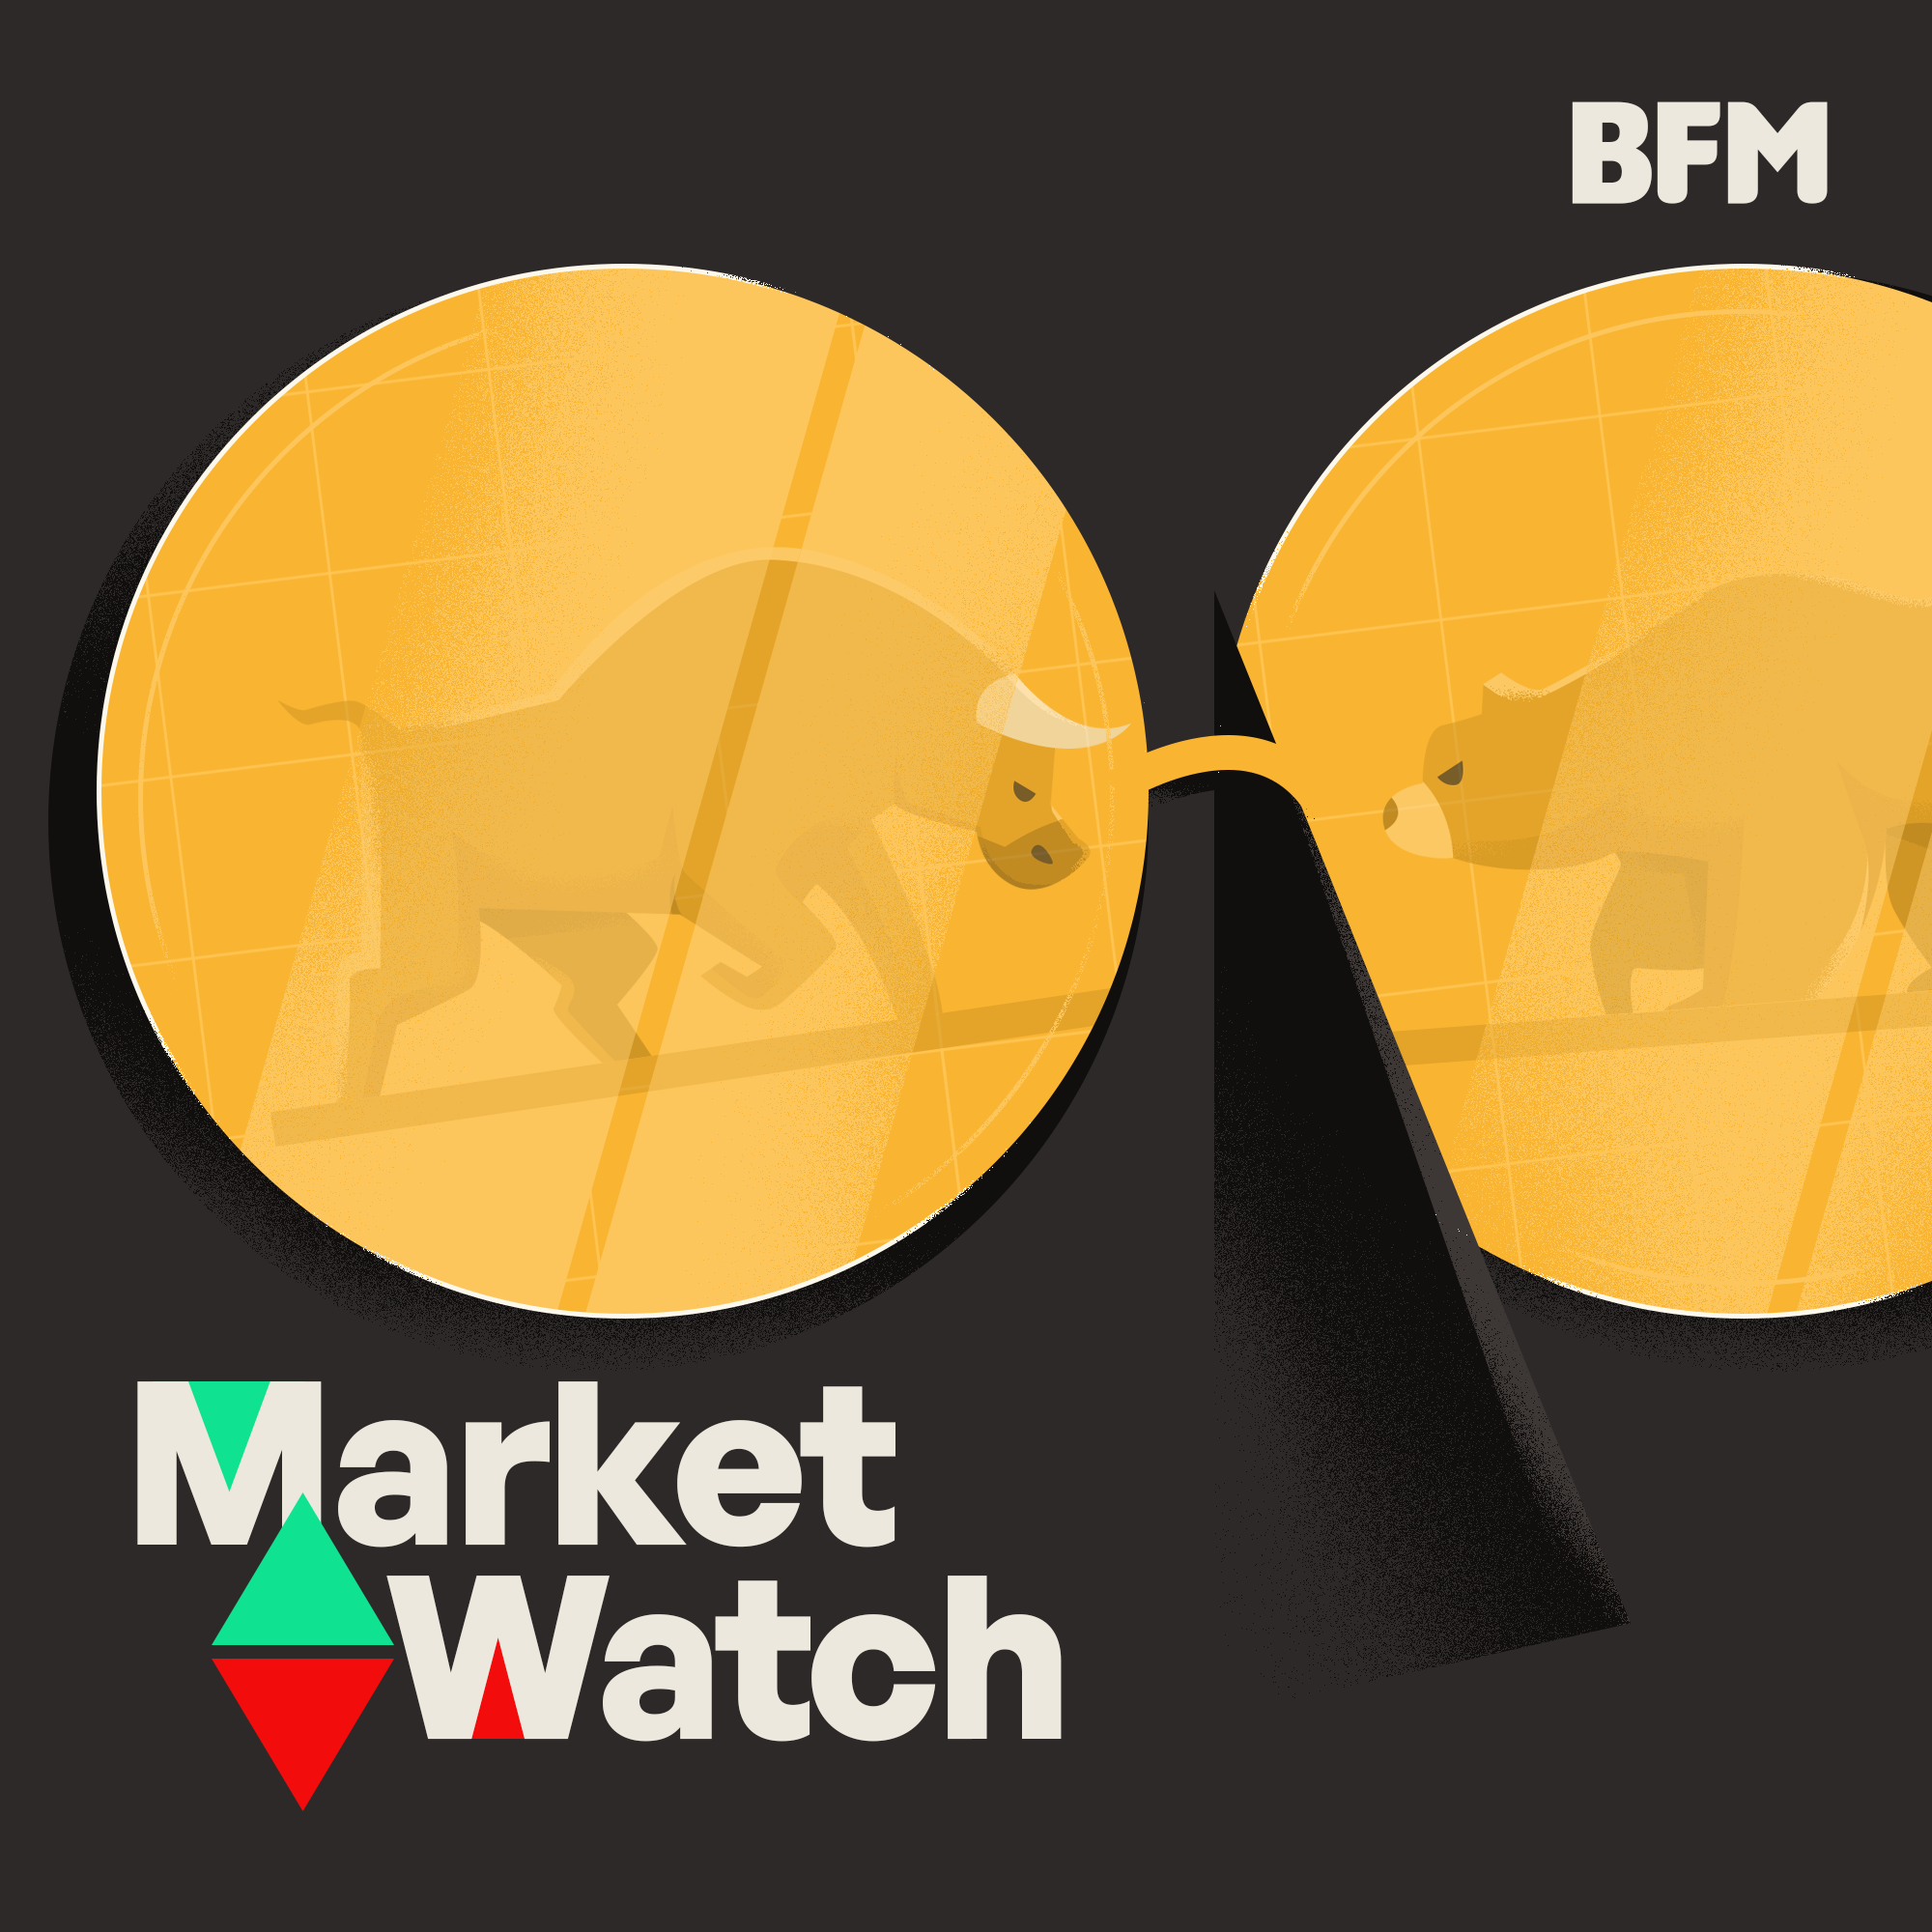 A Focused Eye On Consumer Confidence And Stocks